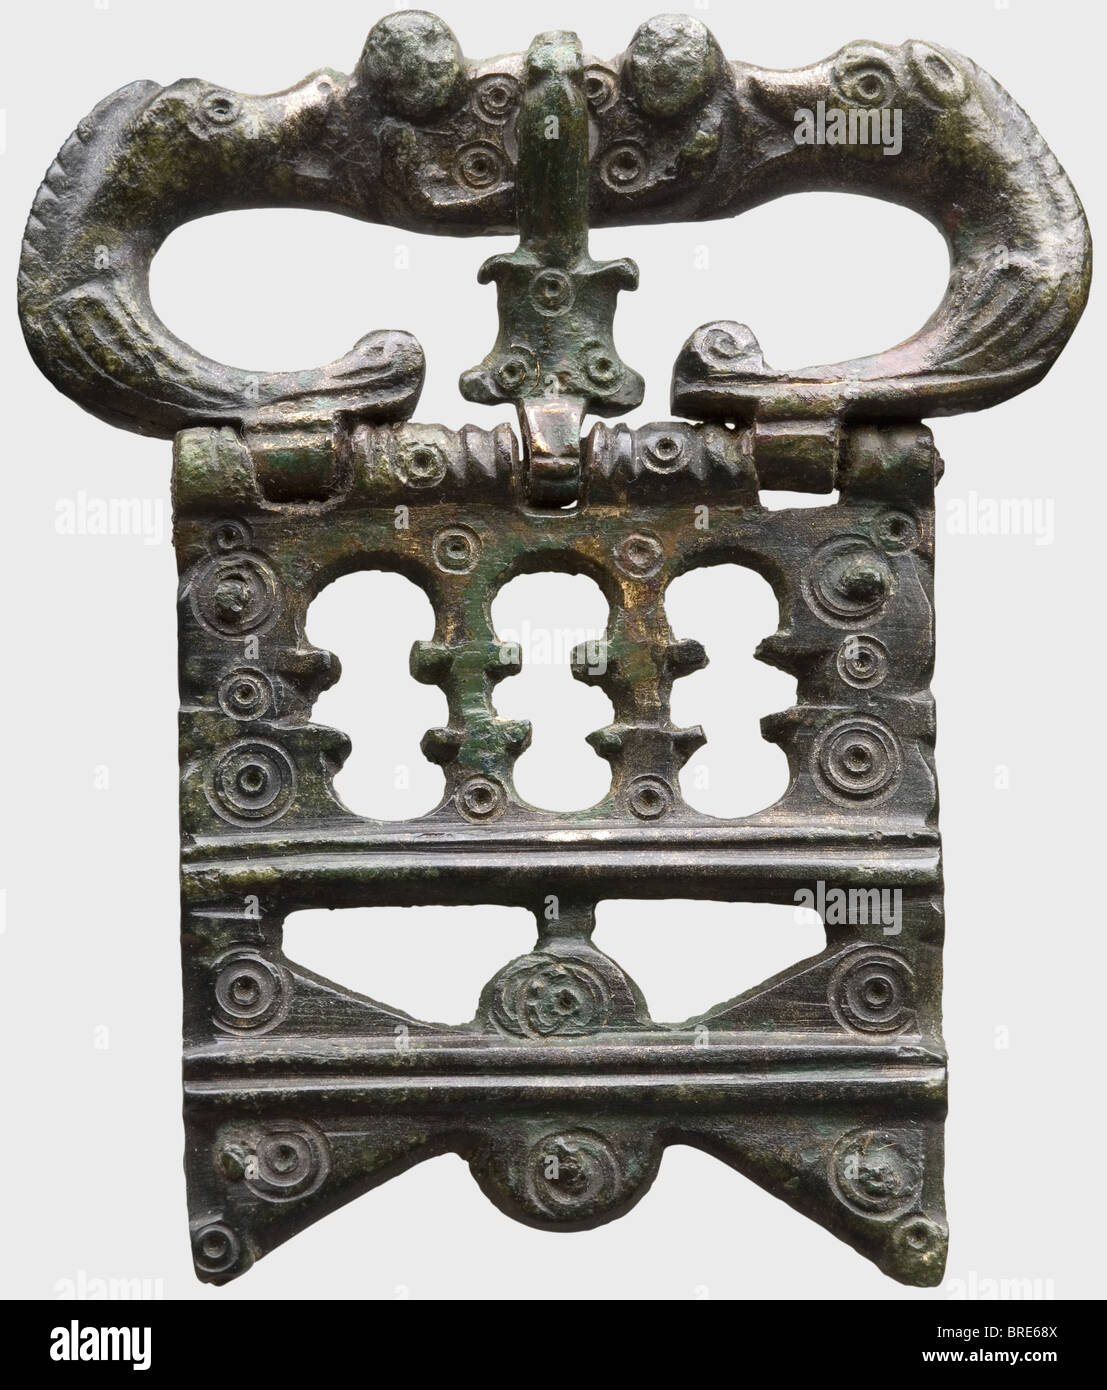 A Late Roman military belt, 4th/5th century A.D. Bronze openwork, lavishly contoured belt buckle. Six identical propeller-shaped mountings, formerly riveted to the leather. A spear-shaped tongue piece for the end of the belt. Rich point and notch decoration. Width of the belt buckle 7.8 cm. Height of the fittings 4.7 cm. Metal preserved with reddish brown to green patina. Mounted on acrylic. Axel Guttmann Collection (no inventory number). Beautiful, and very well-preserved military accouterment for the late Roman Army. historic, historical, ancient world, ancie, Stock Photo